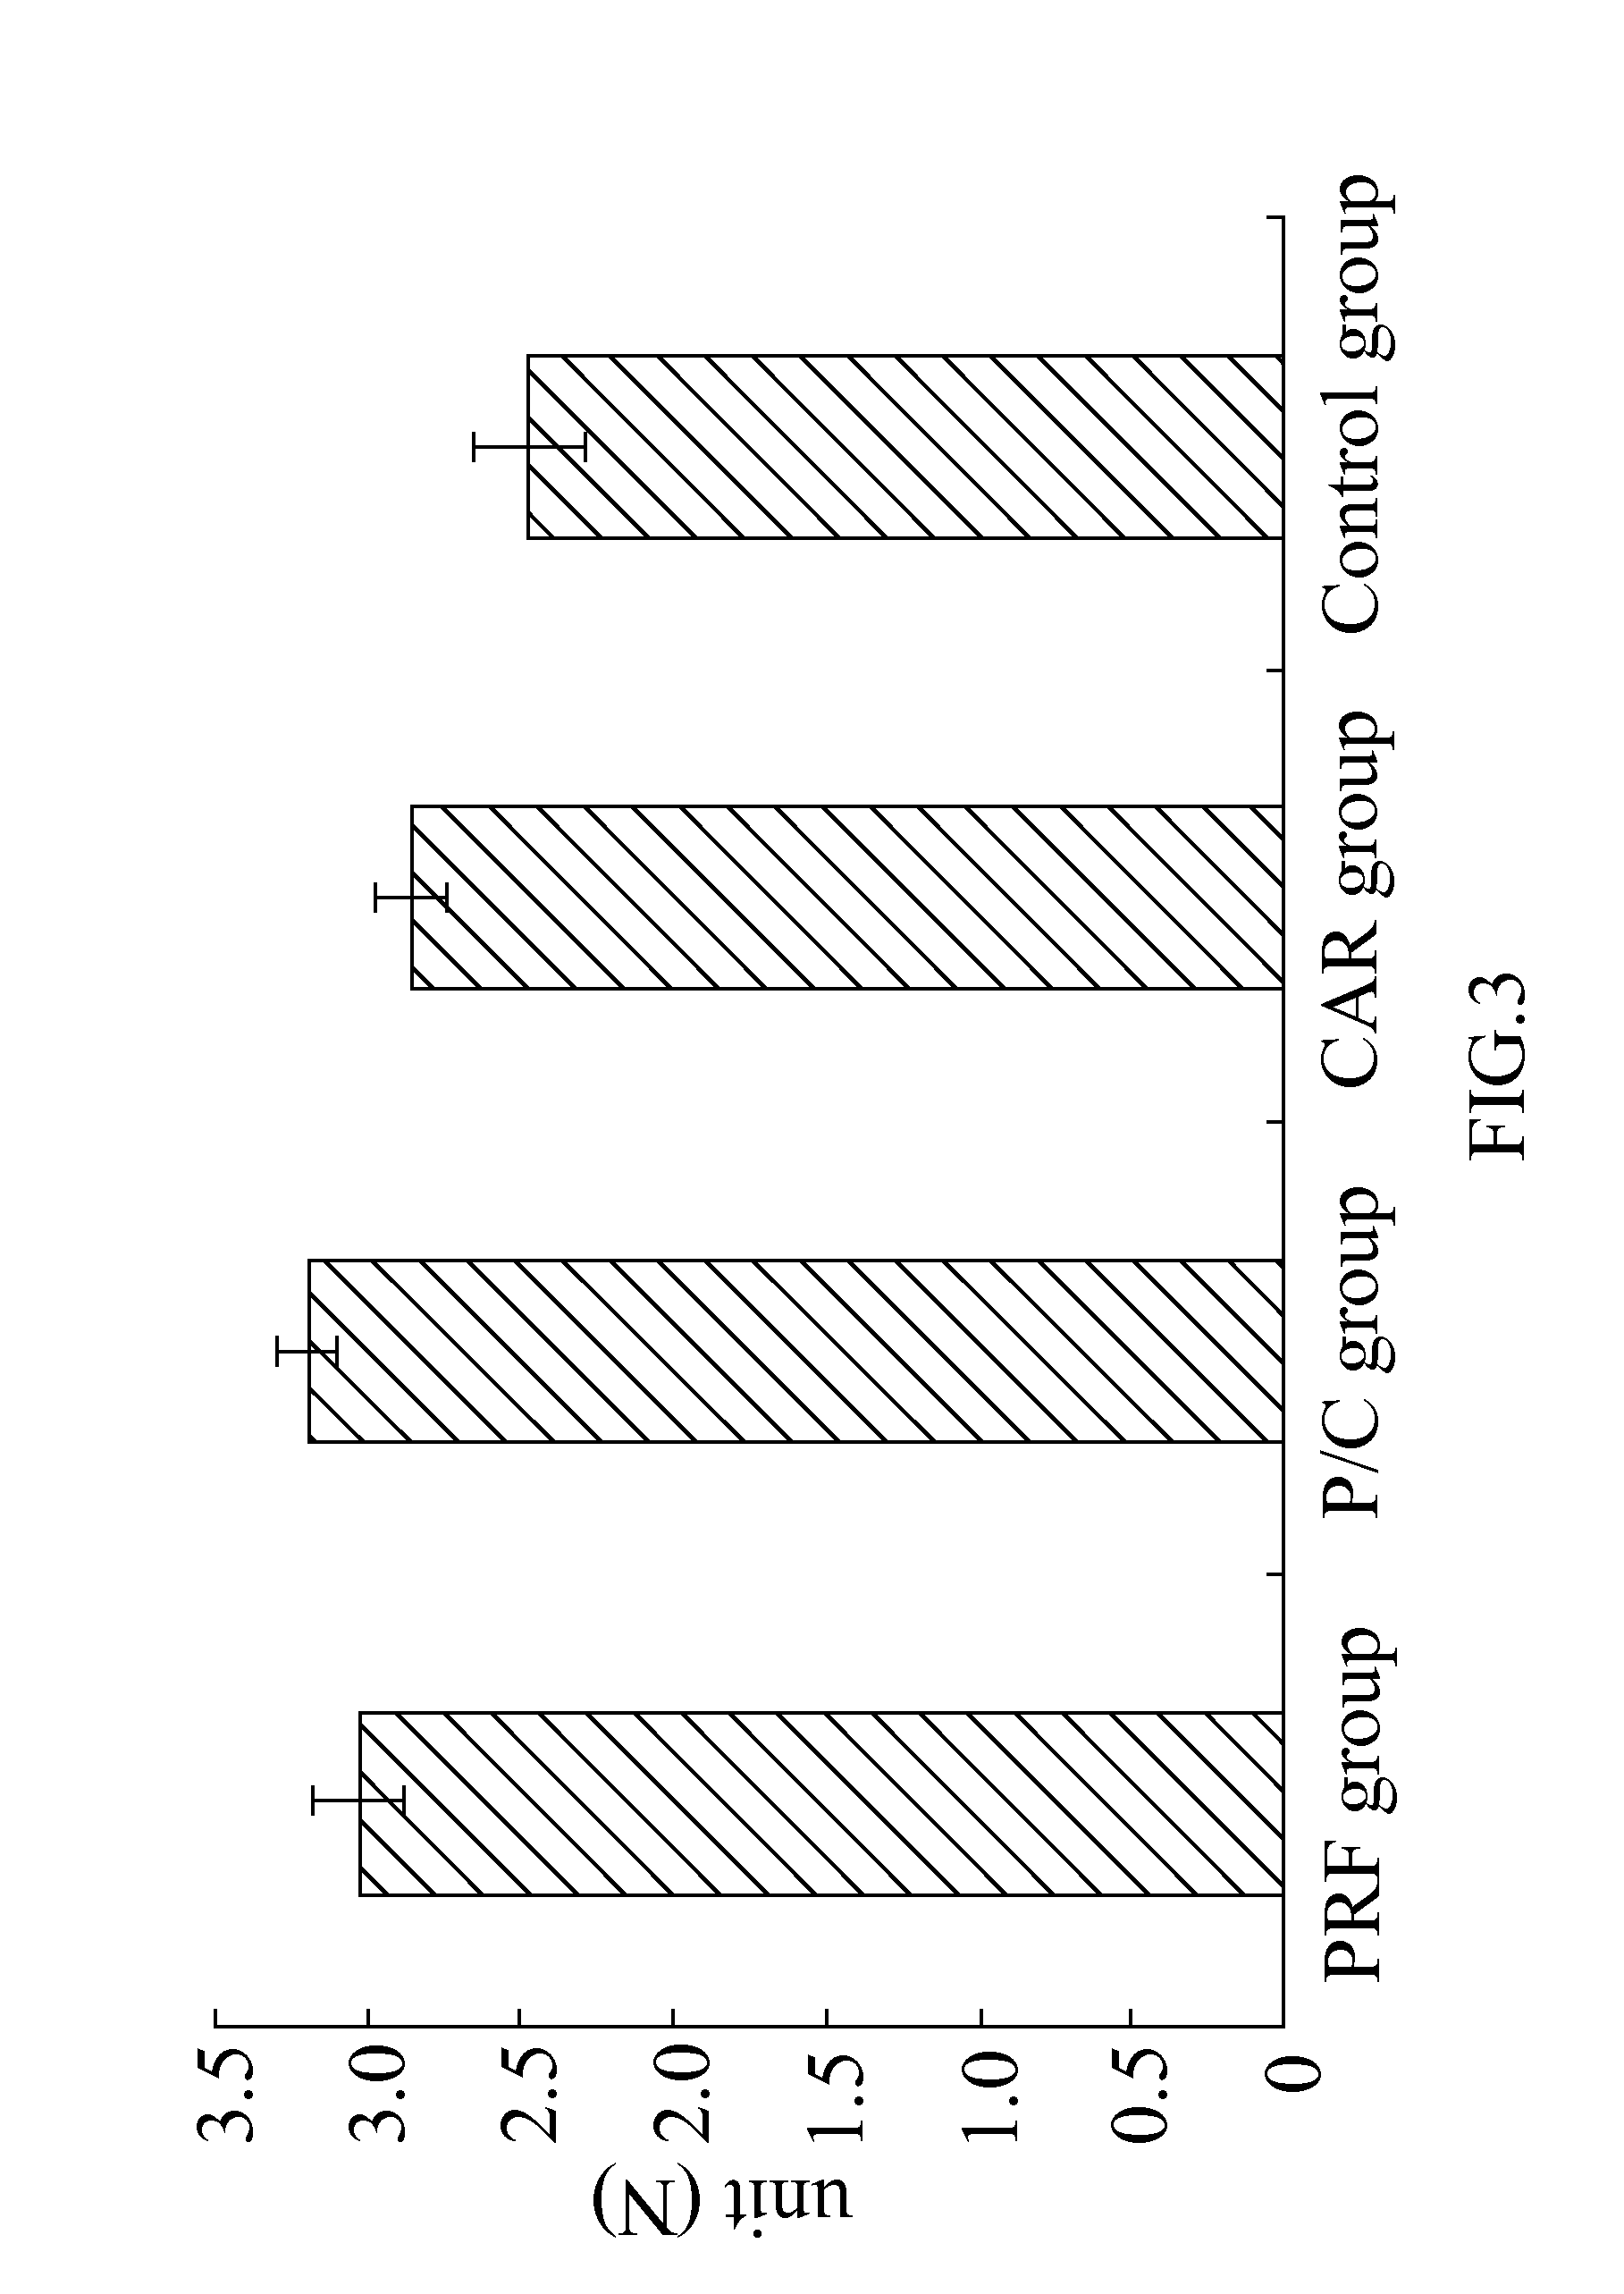 Composition for treating articular cartilage defect, and method of manufacture thereof